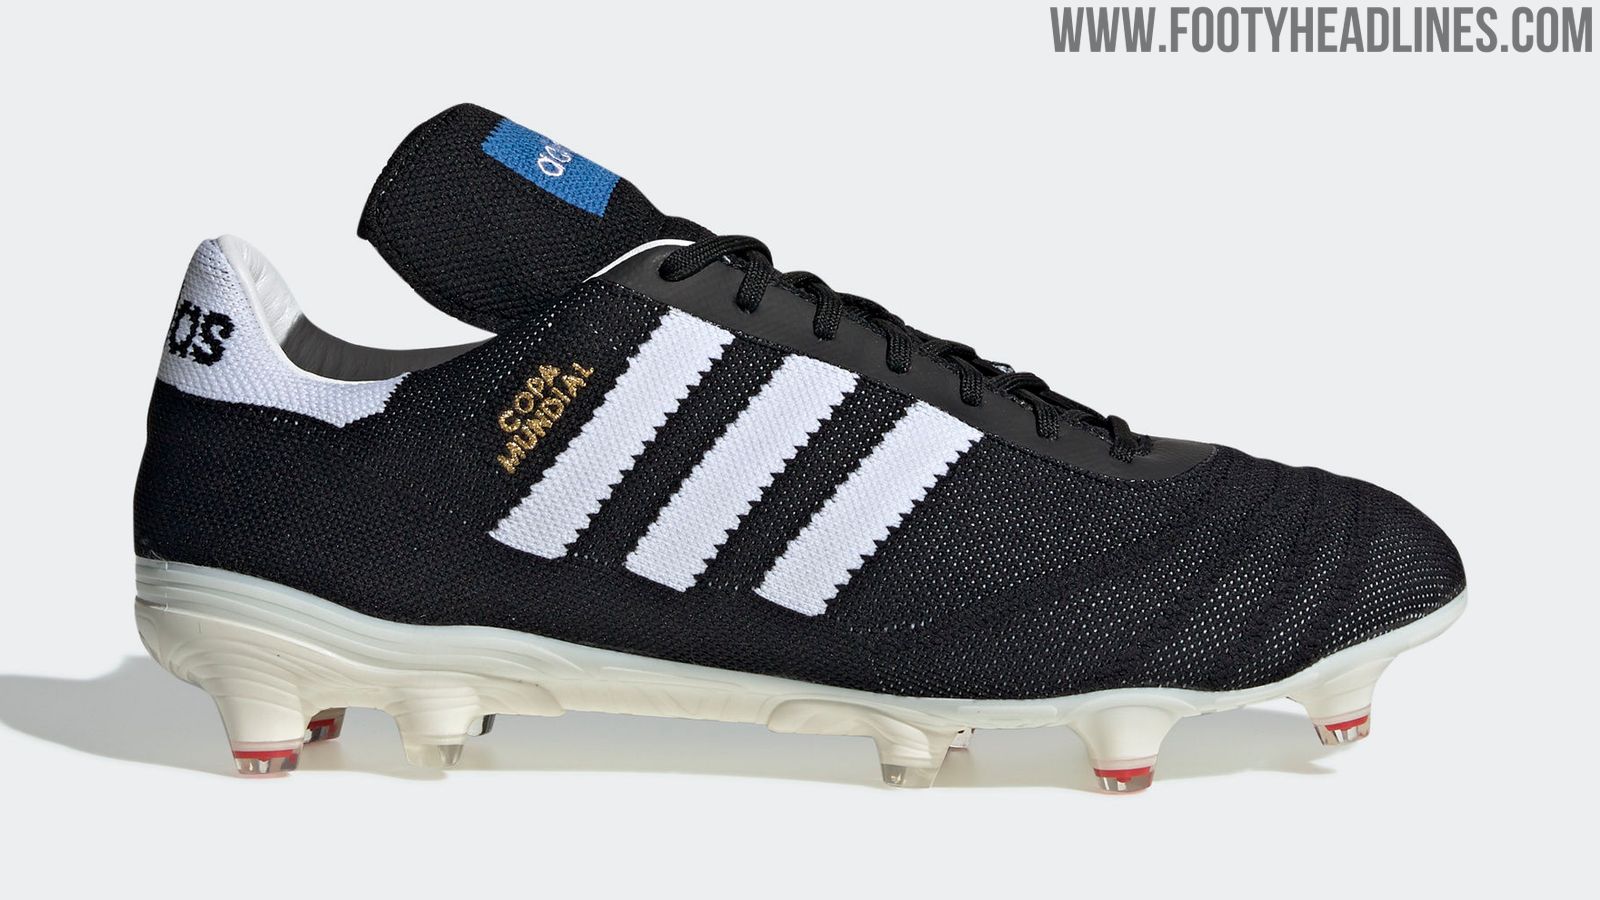 Limited-Edition Adidas Football 70 Years Collection Revealed - Headlines